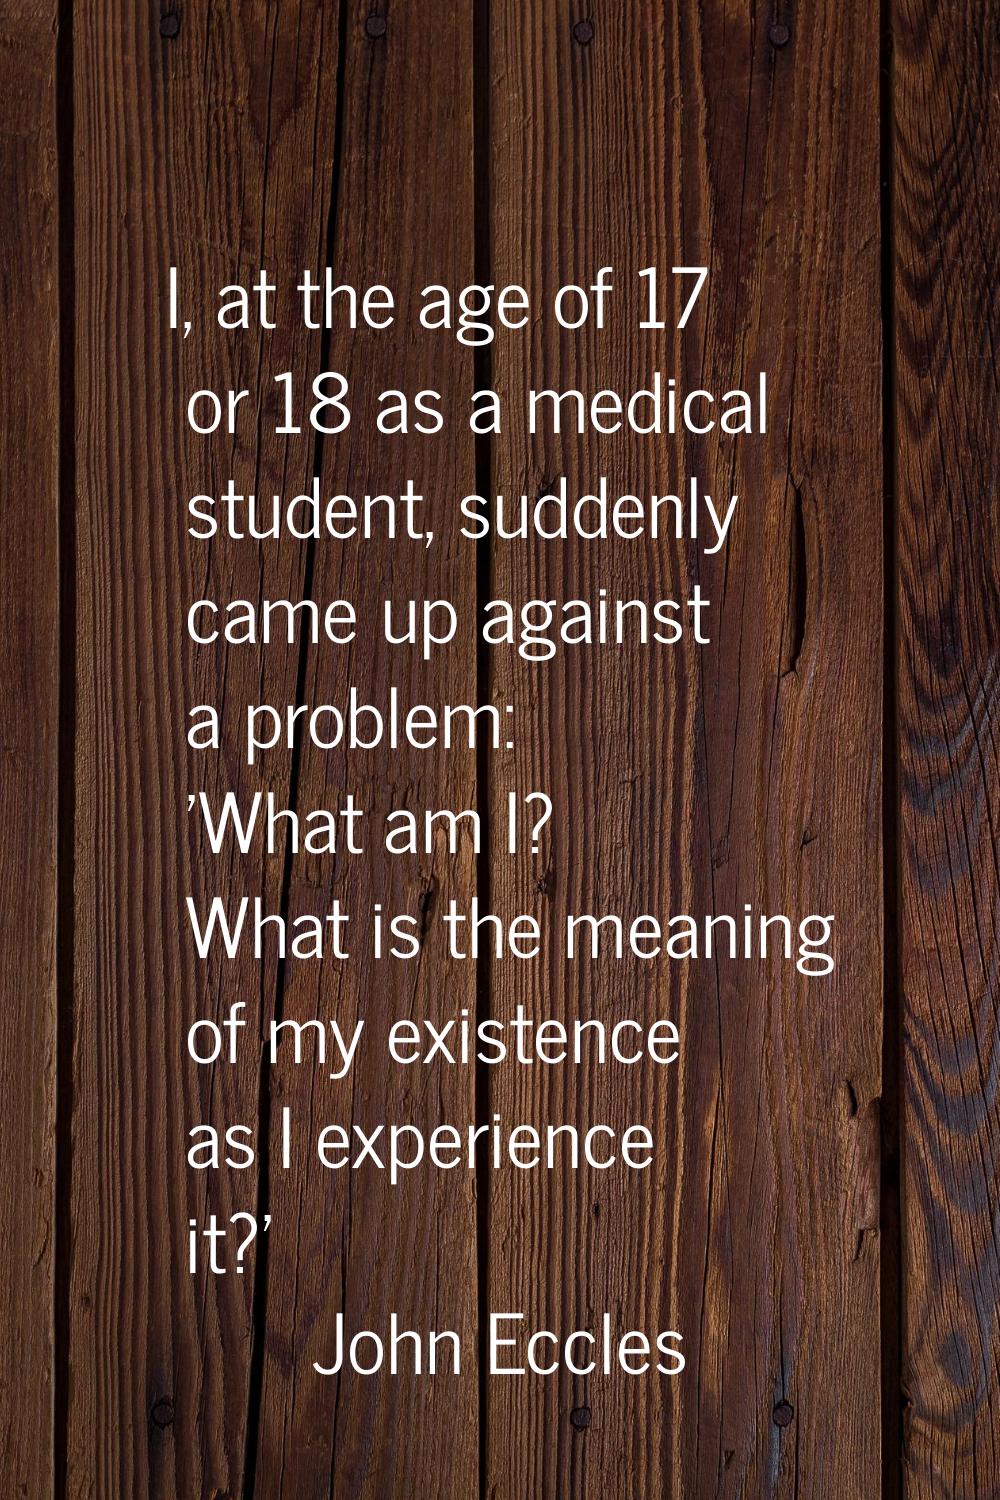 I, at the age of 17 or 18 as a medical student, suddenly came up against a problem: 'What am I? Wha